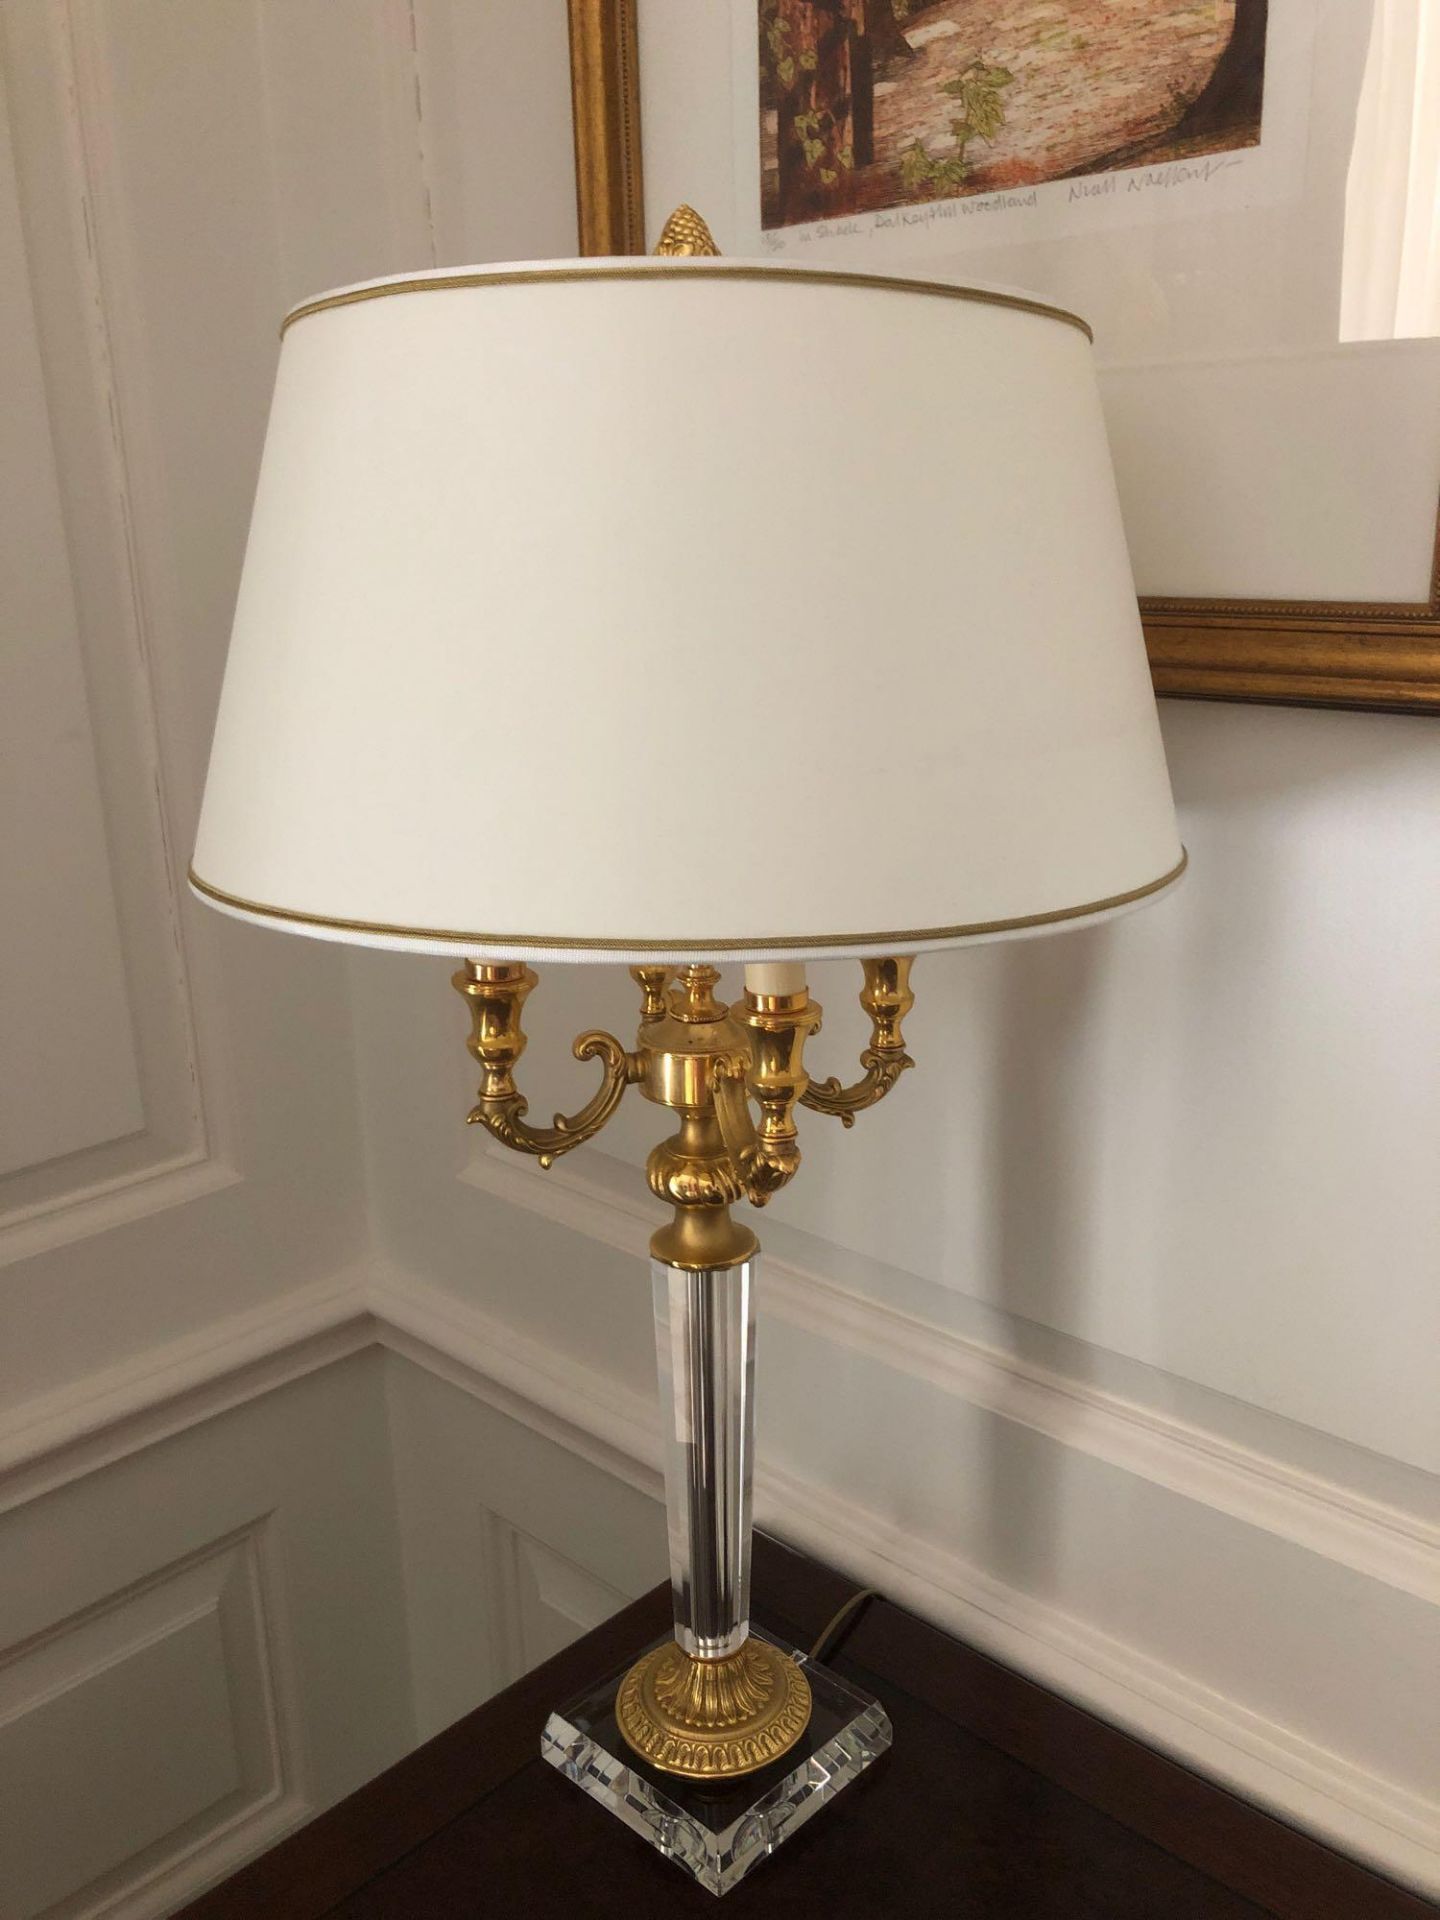 Laudarte Crystal Table Lamps Inserts And Decorations In 24ct Gold With Shade 95cm Tall (Room 503 /